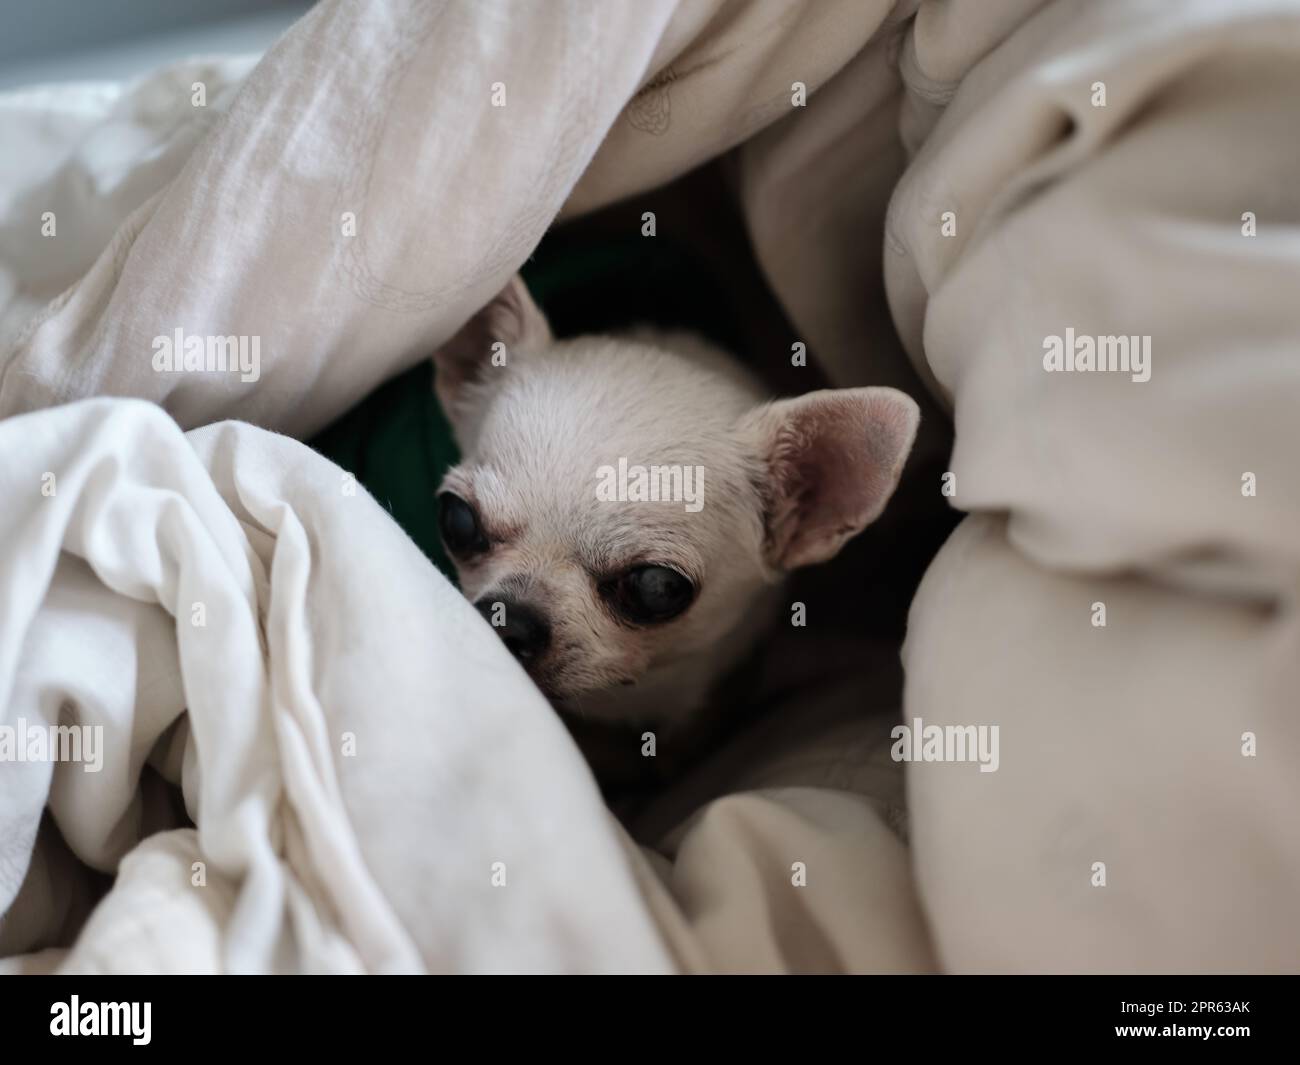 Chihuahua dog sleeping at home on the bed covered with a blanket Stock Photo